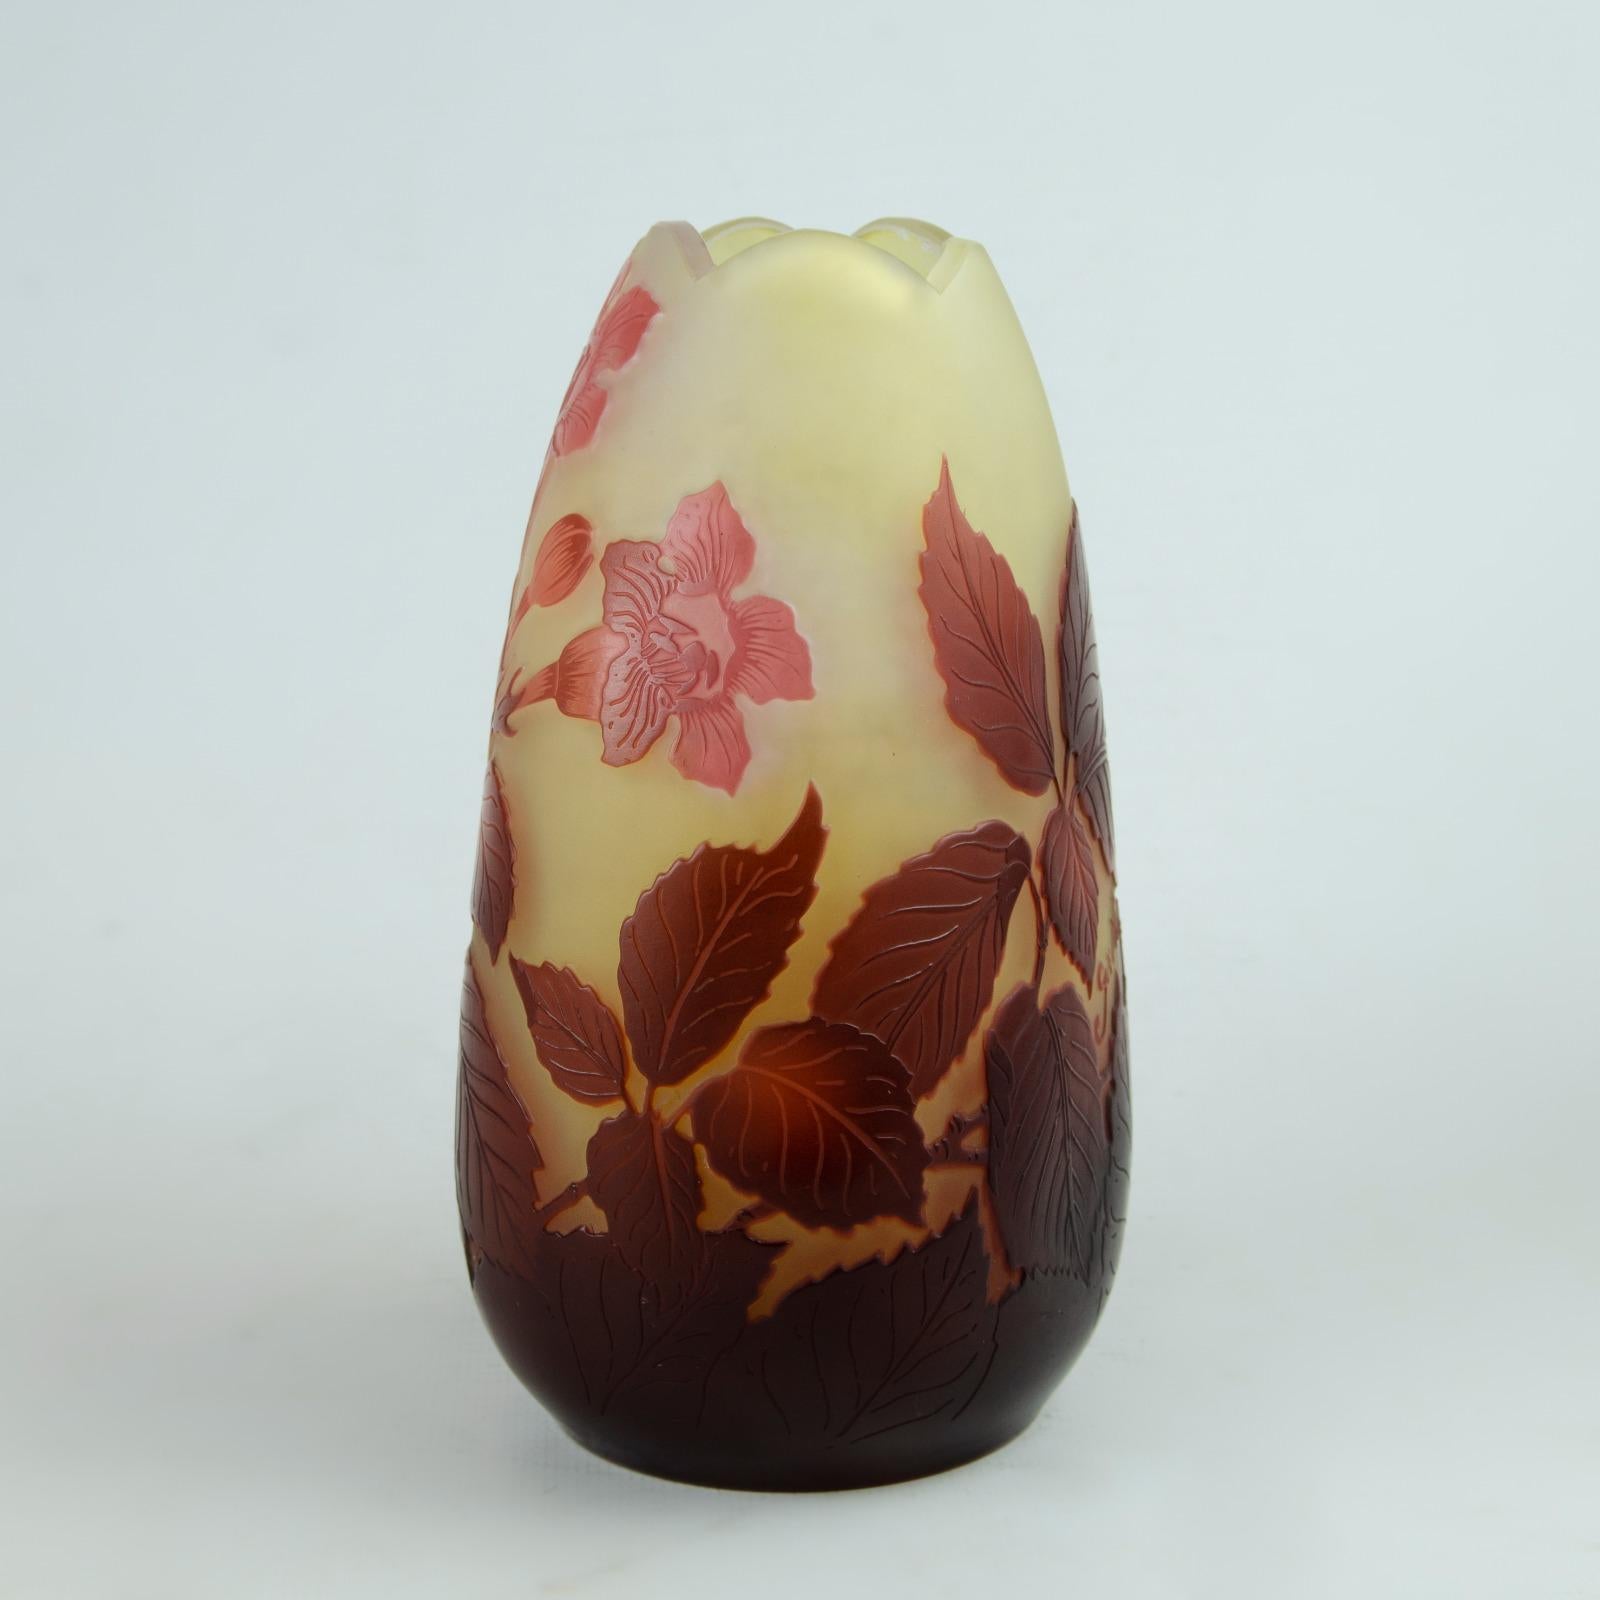 Engraved Emile Galle Cameo Glass Vase 1900 For Sale